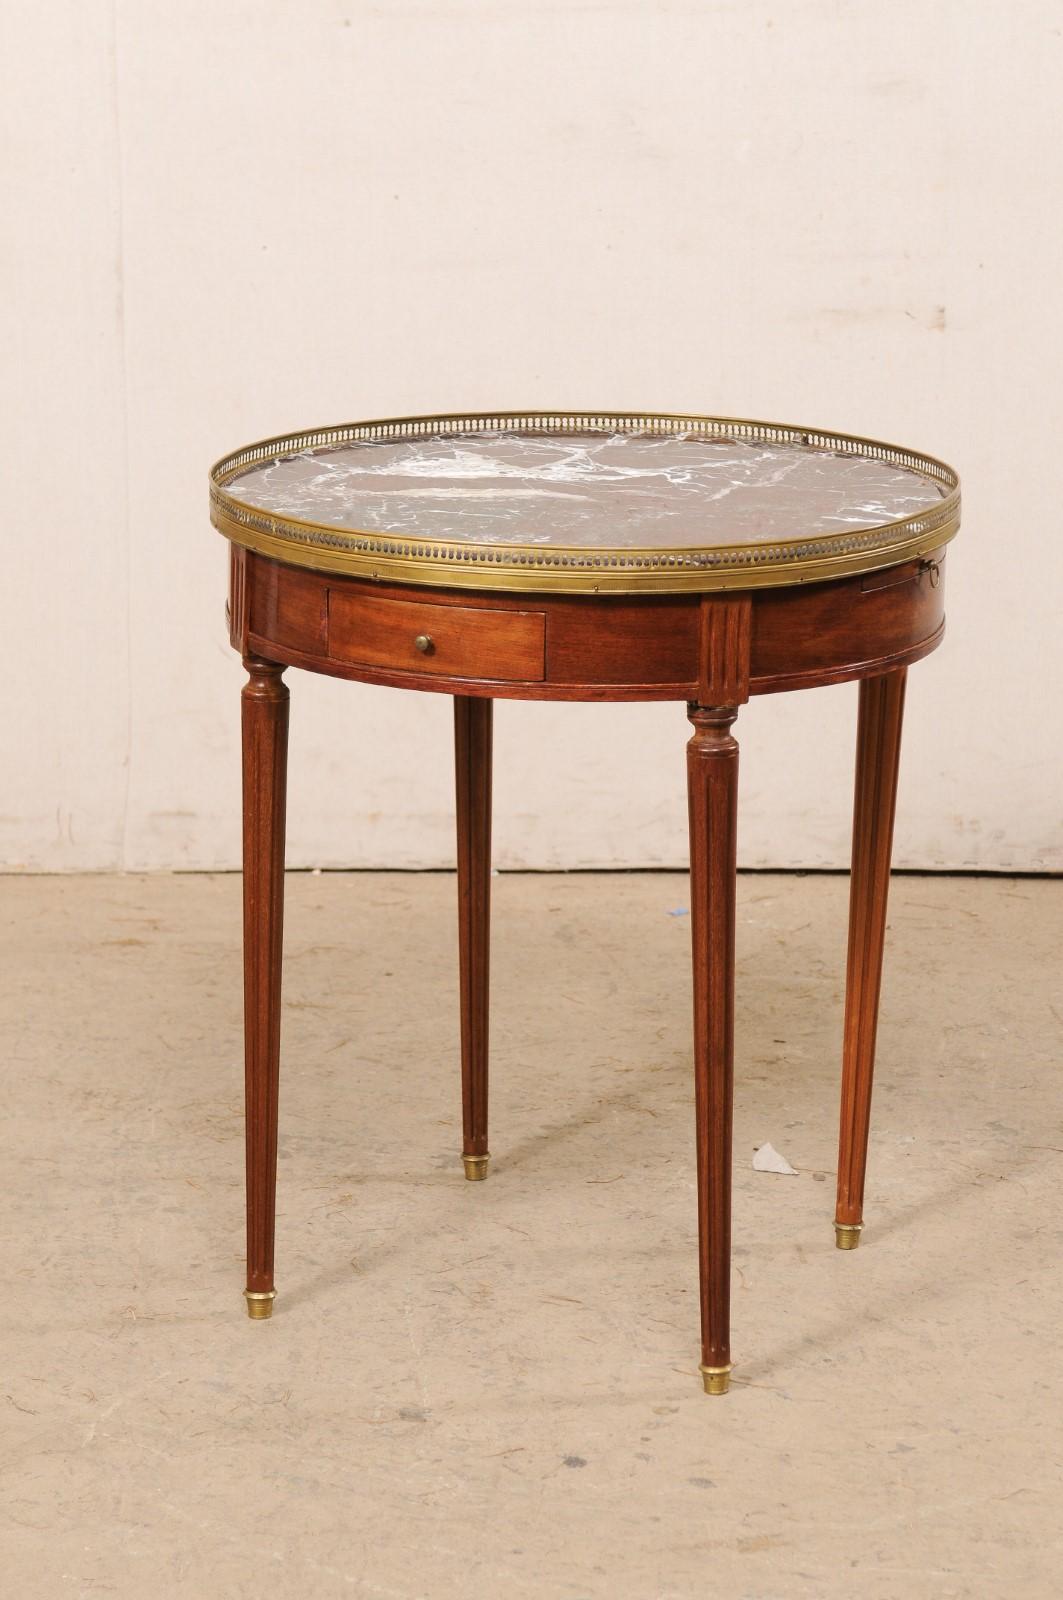 French Antique Round Cherry Wood Table W/Marble Top & Brass Gallery and Feet For Sale 2